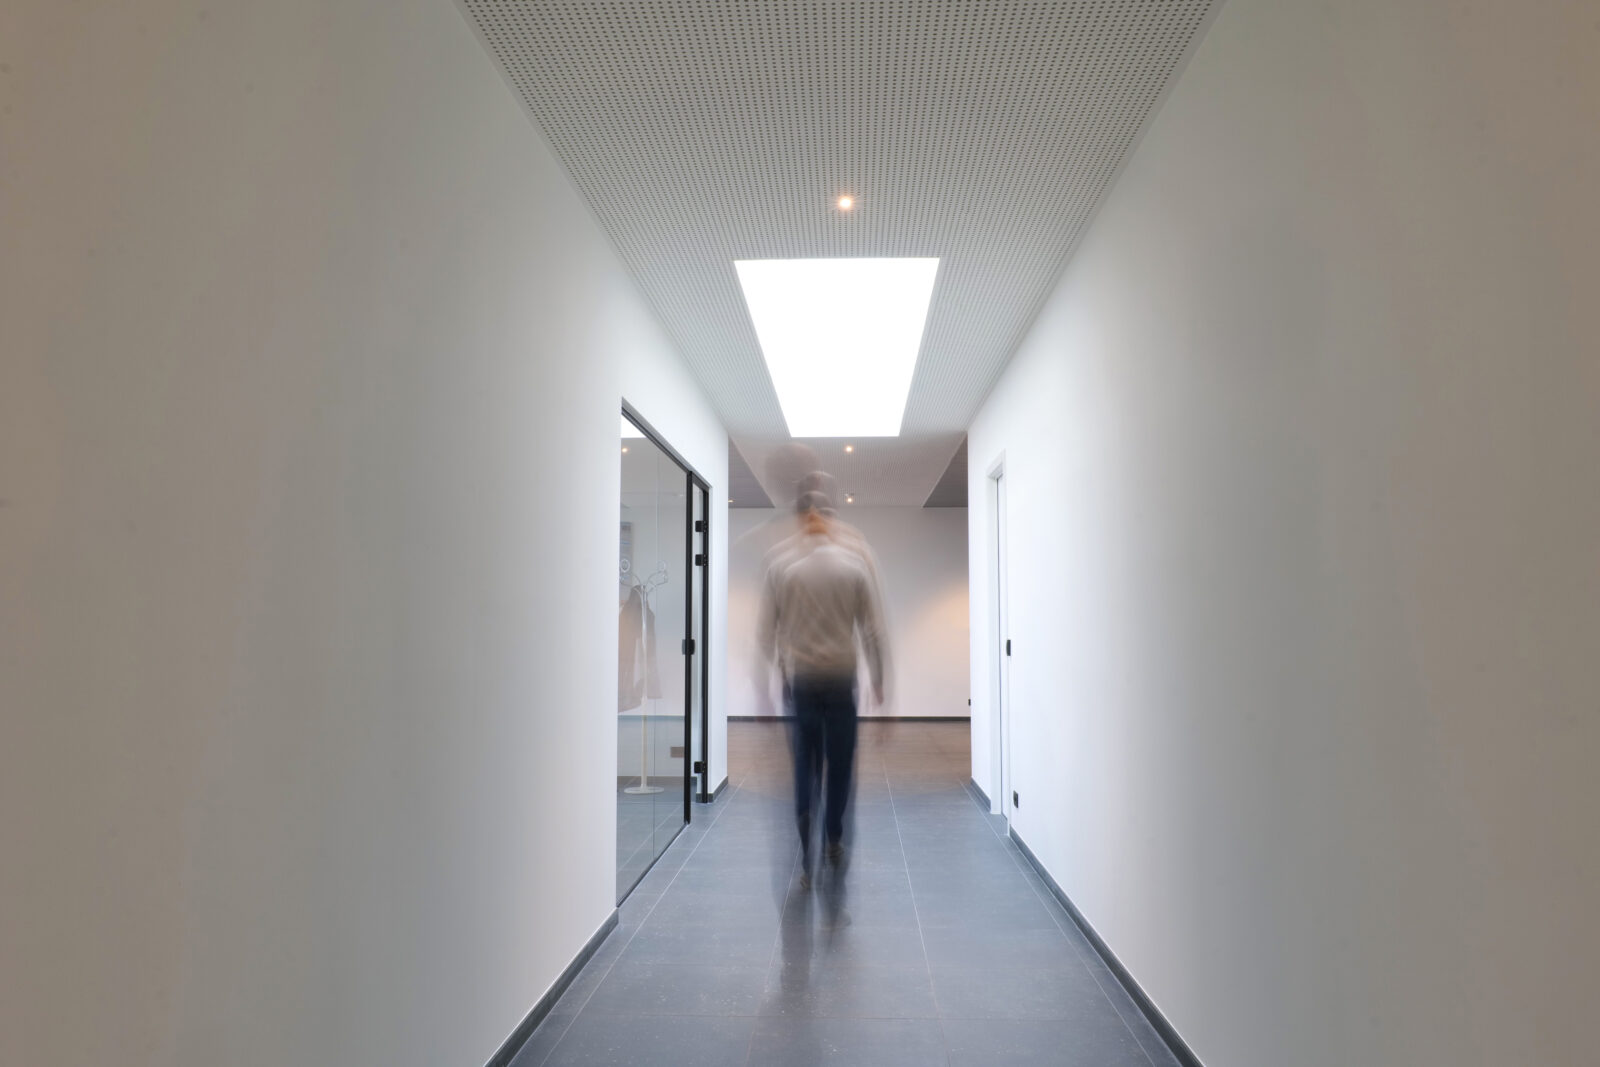 The Future of Buildings Includes Smart Lighting Systems